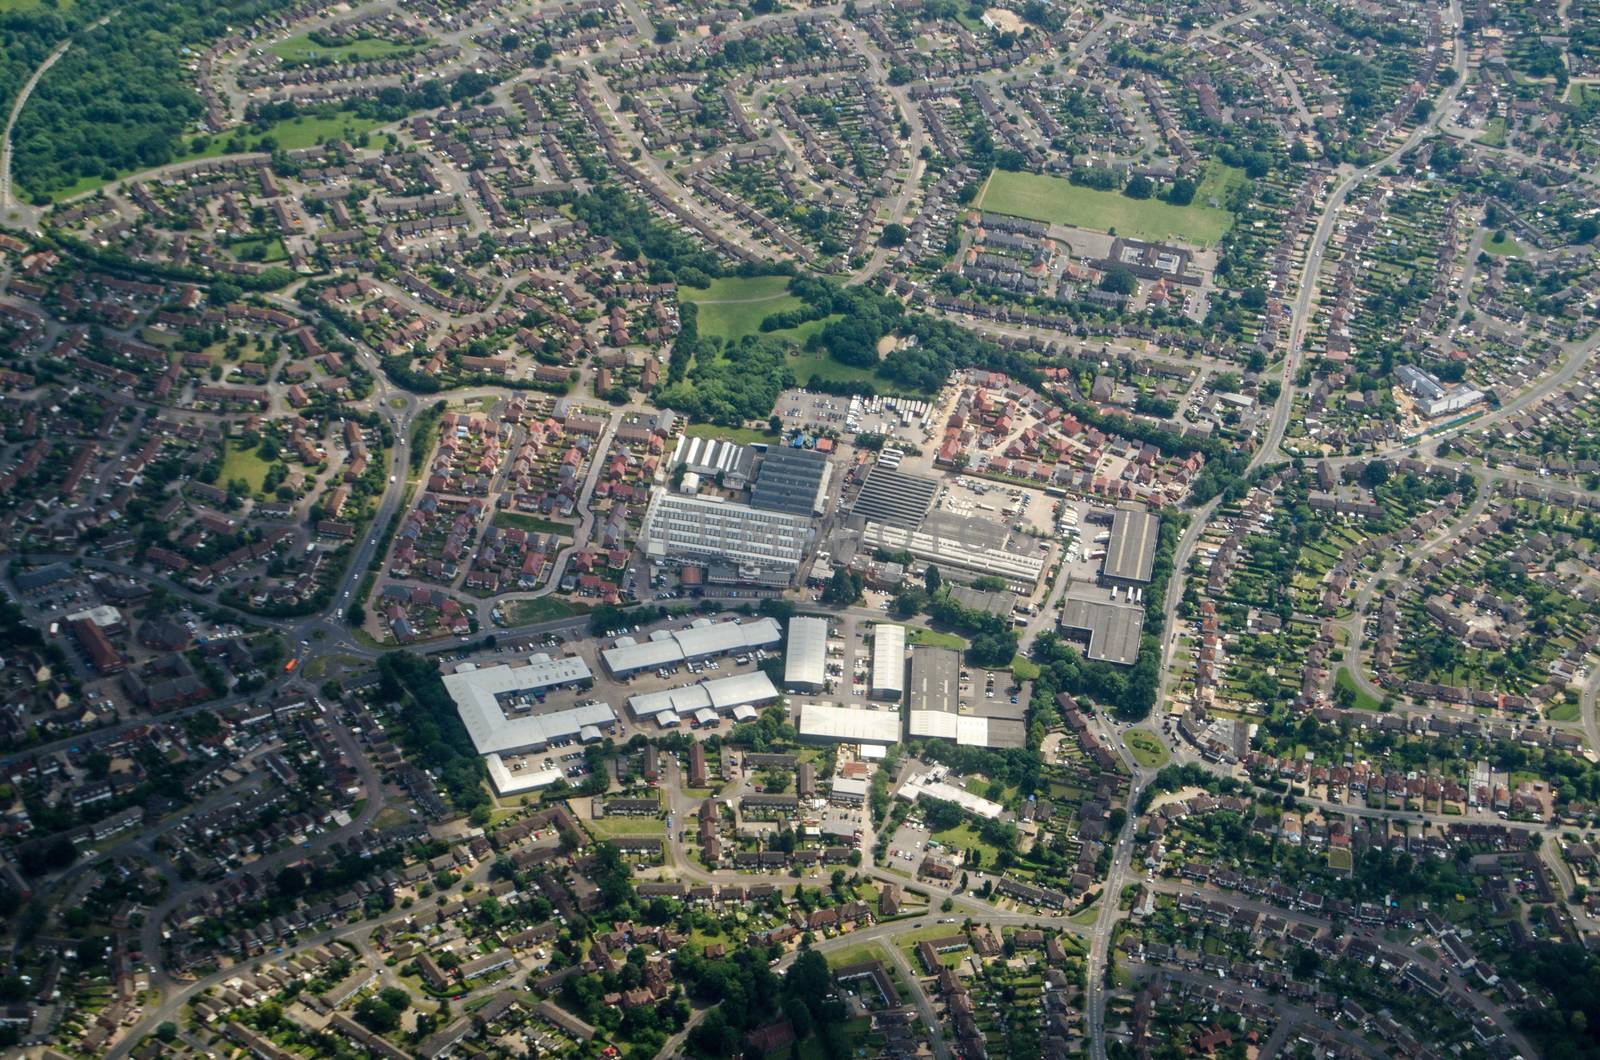 Aerial view of an out of town shopping centre in the Sandford area of Reading, Berkshire.  The centre includes shops and leisure facilities.  Viewed on a sunny, summer day